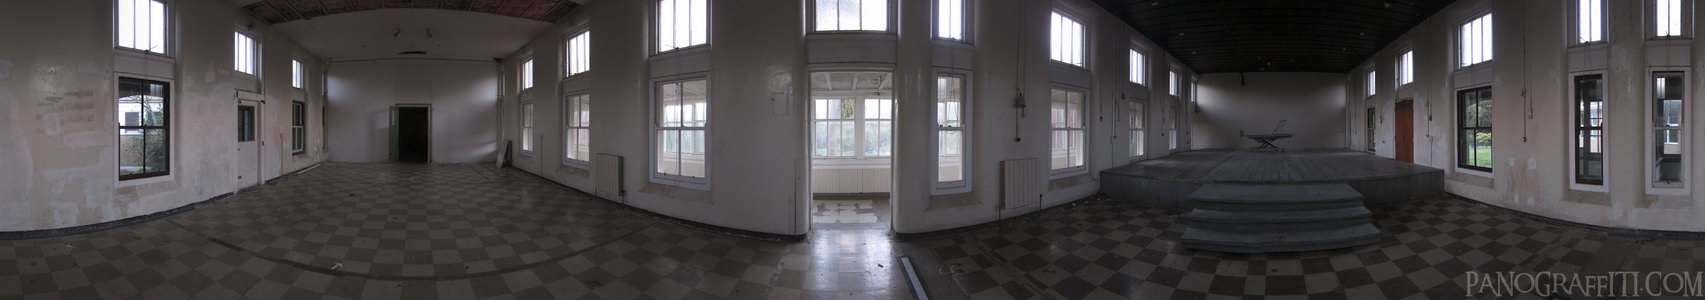 Abandoned Chest Hospital Theater Room - A 360 degree view of the abandoned Chest Hospital near Newtown